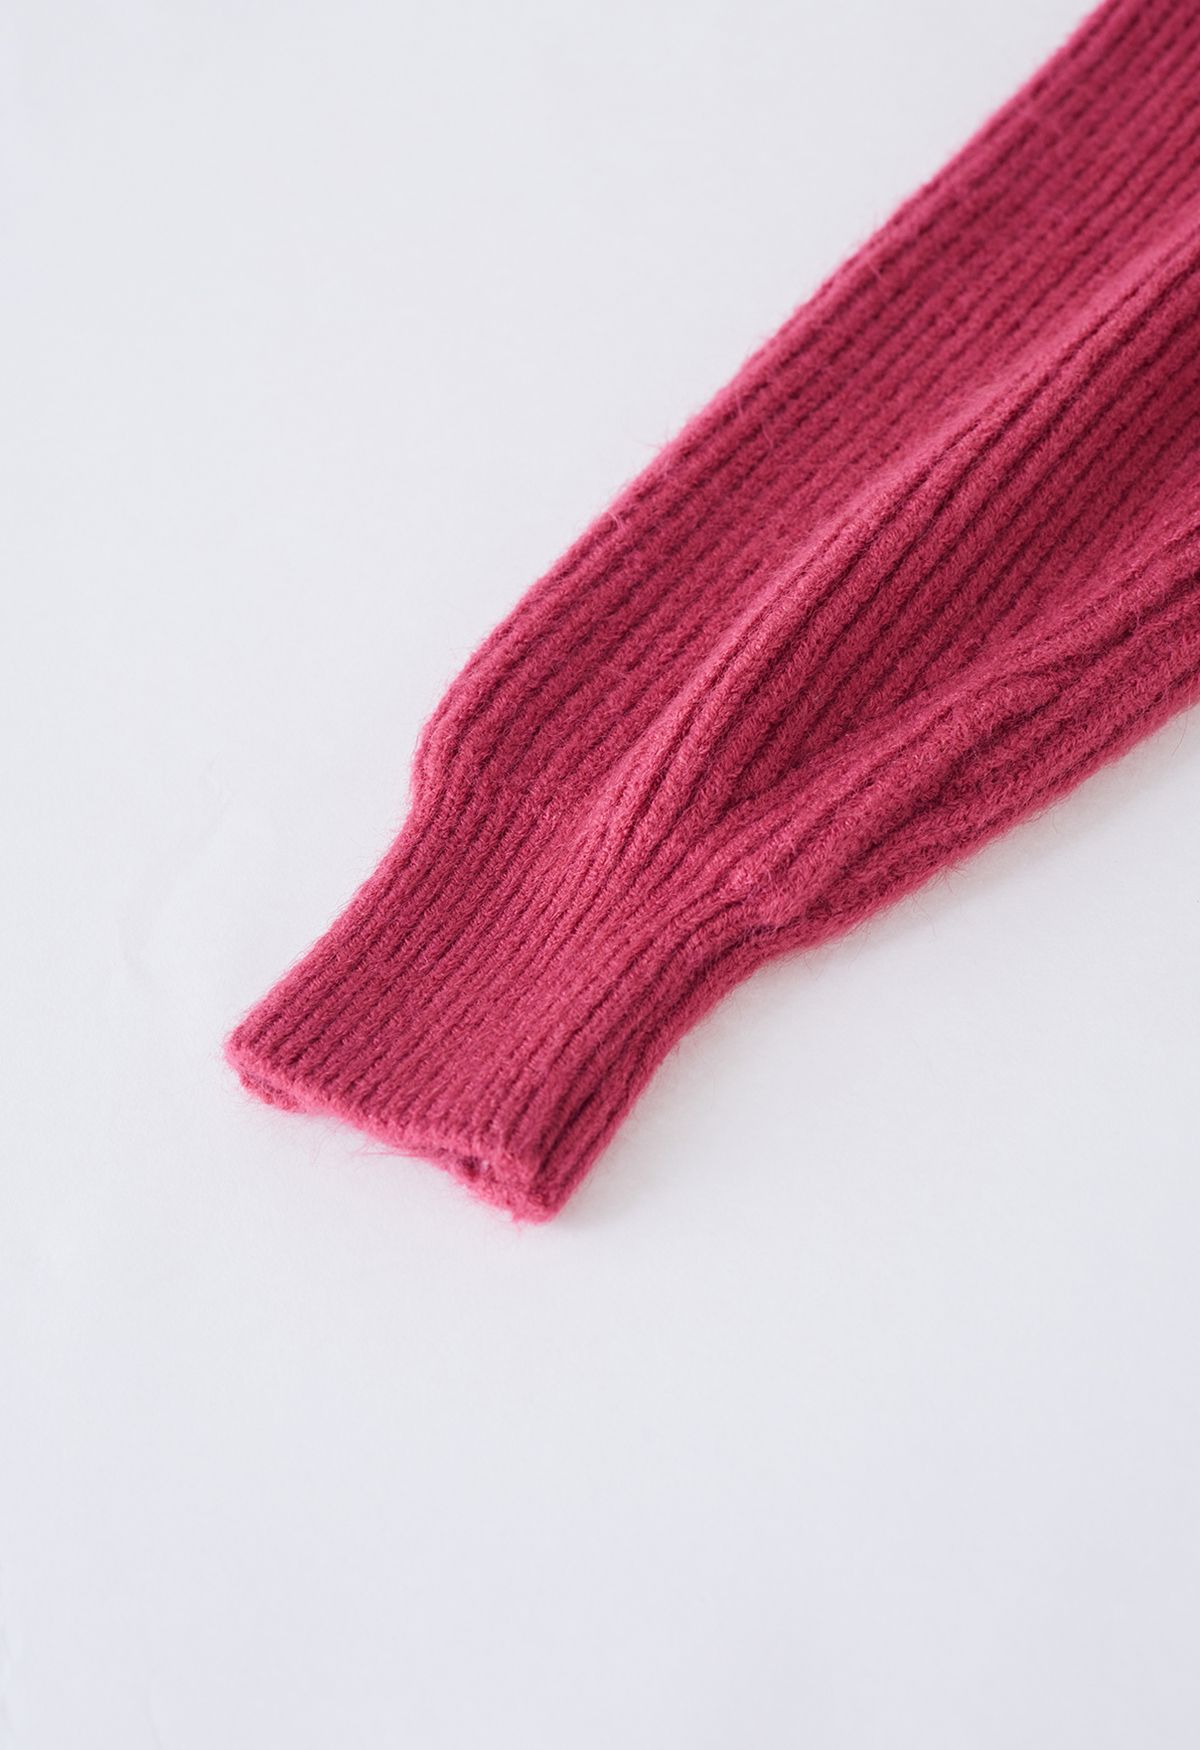 Solid Color Rib Knit Sweater in Berry